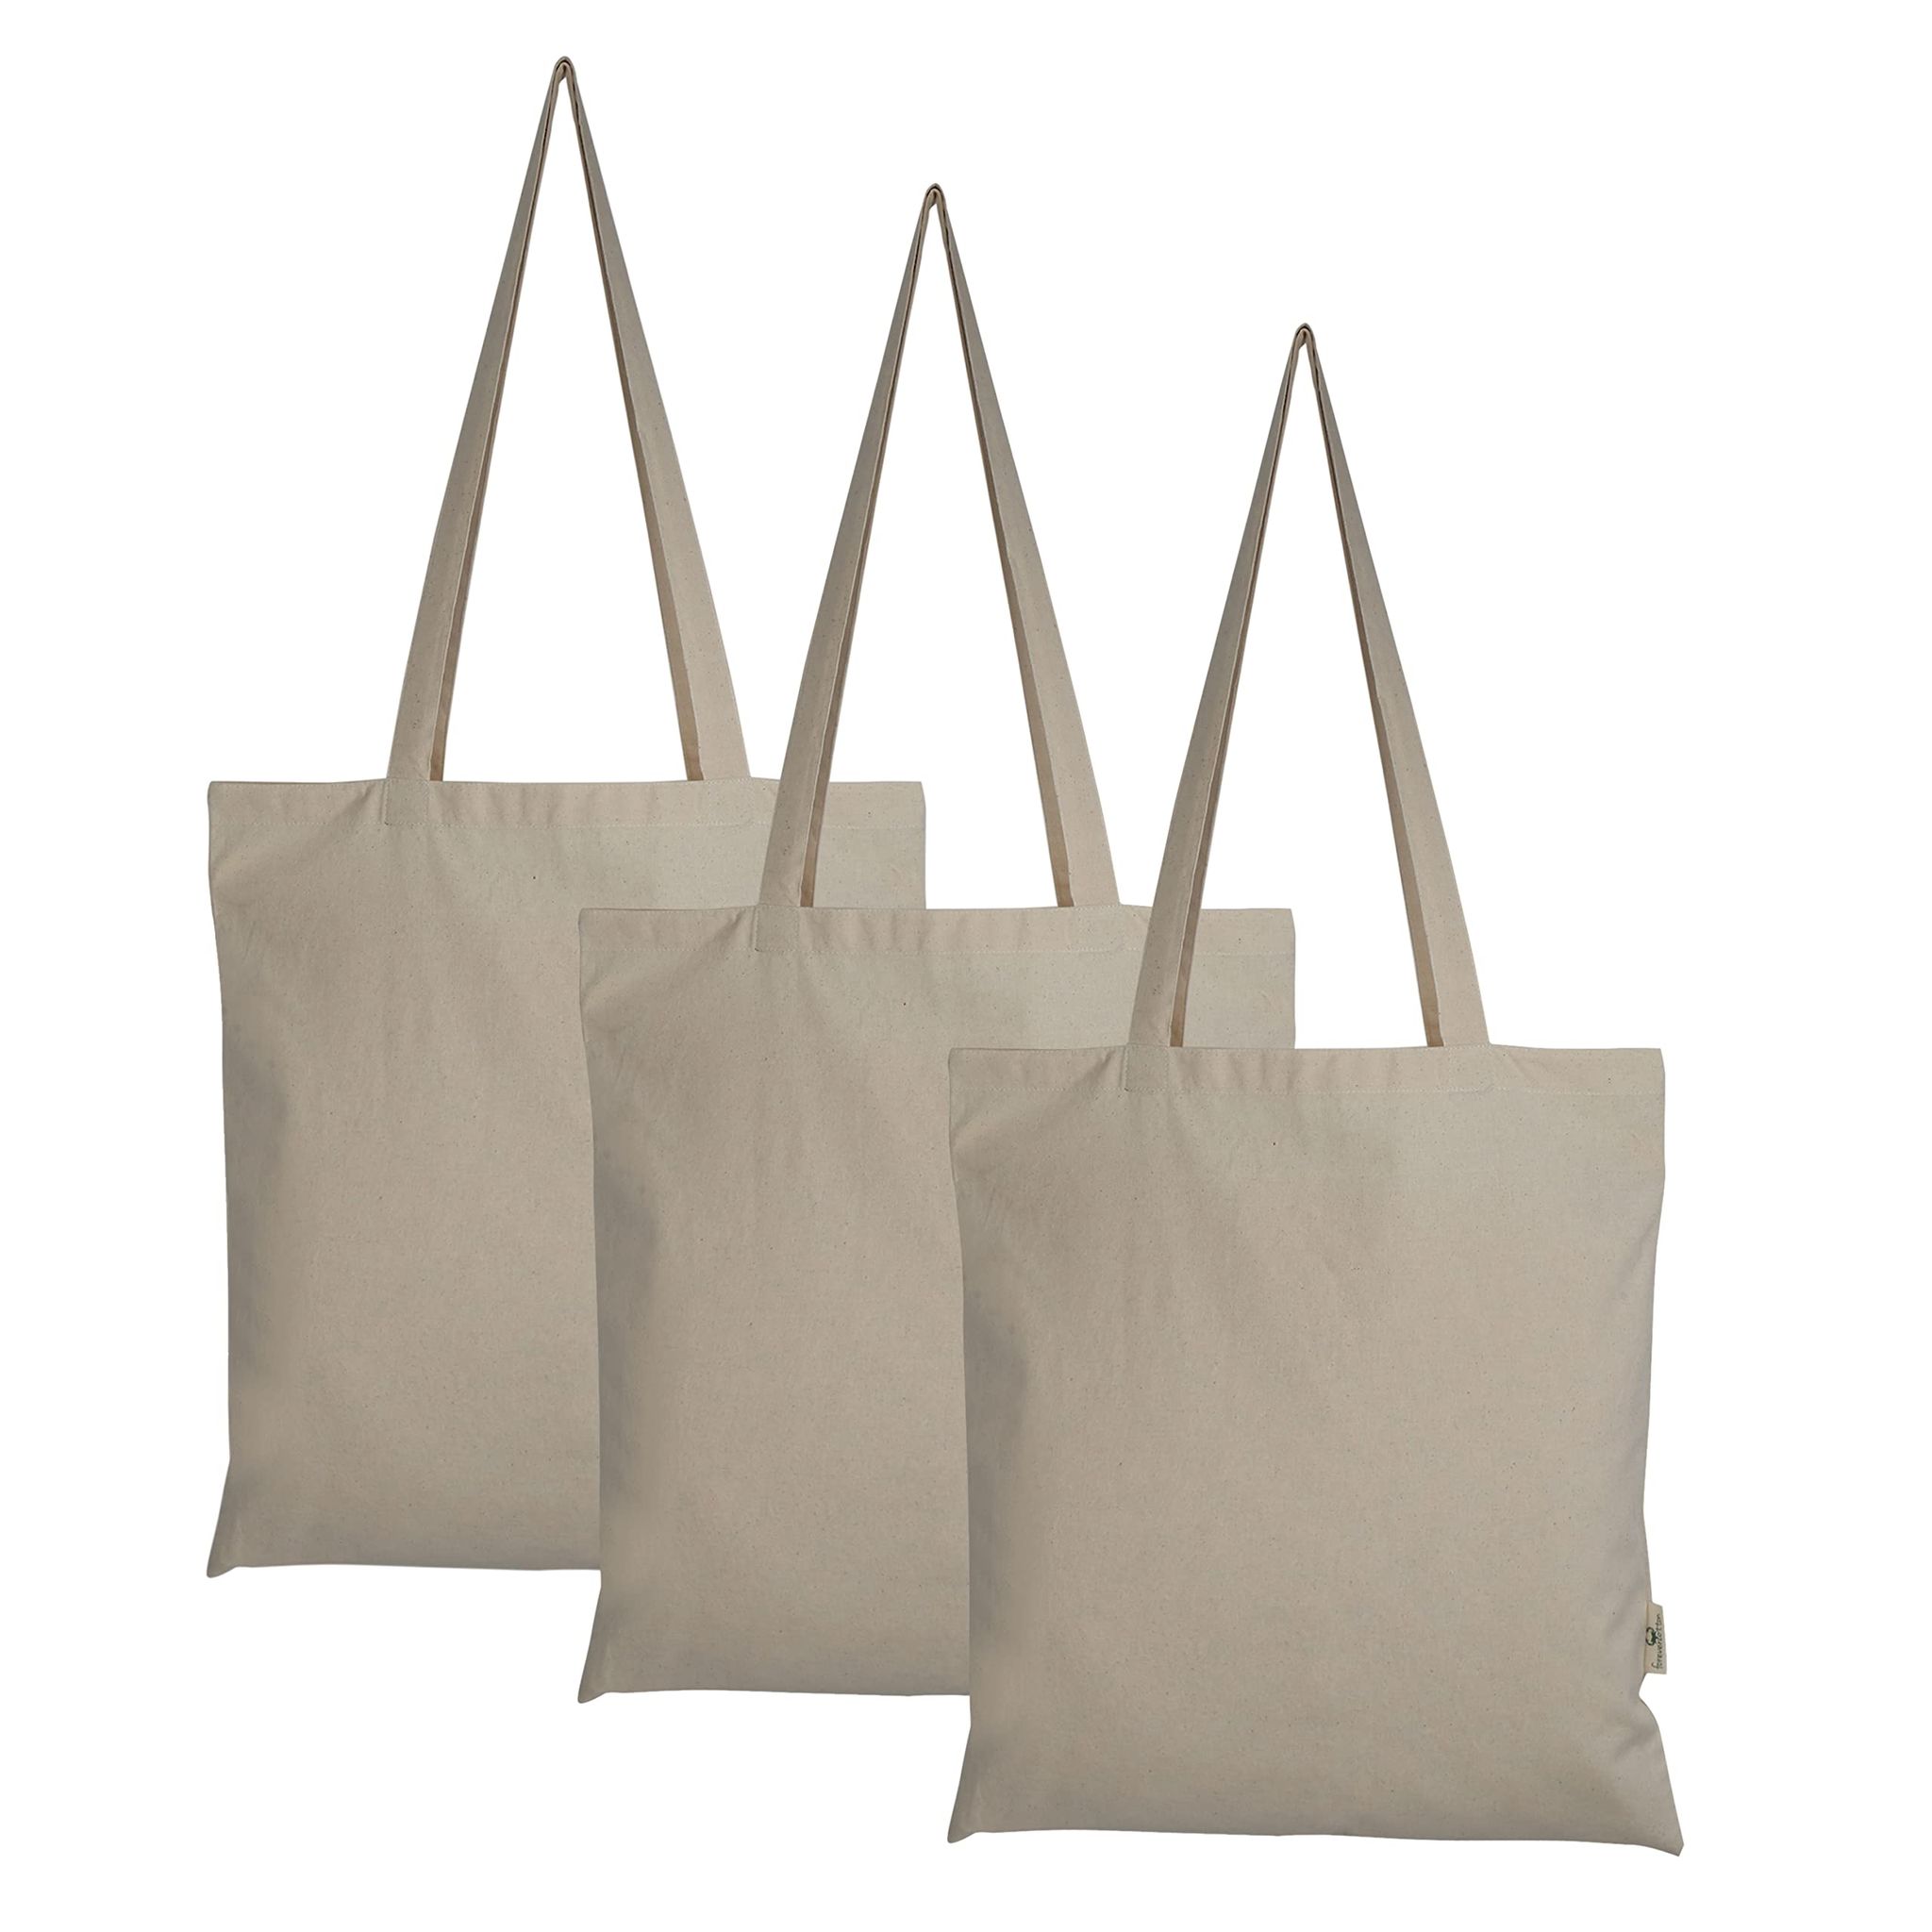 Paper shopping bags cartoon Royalty Free Vector Image